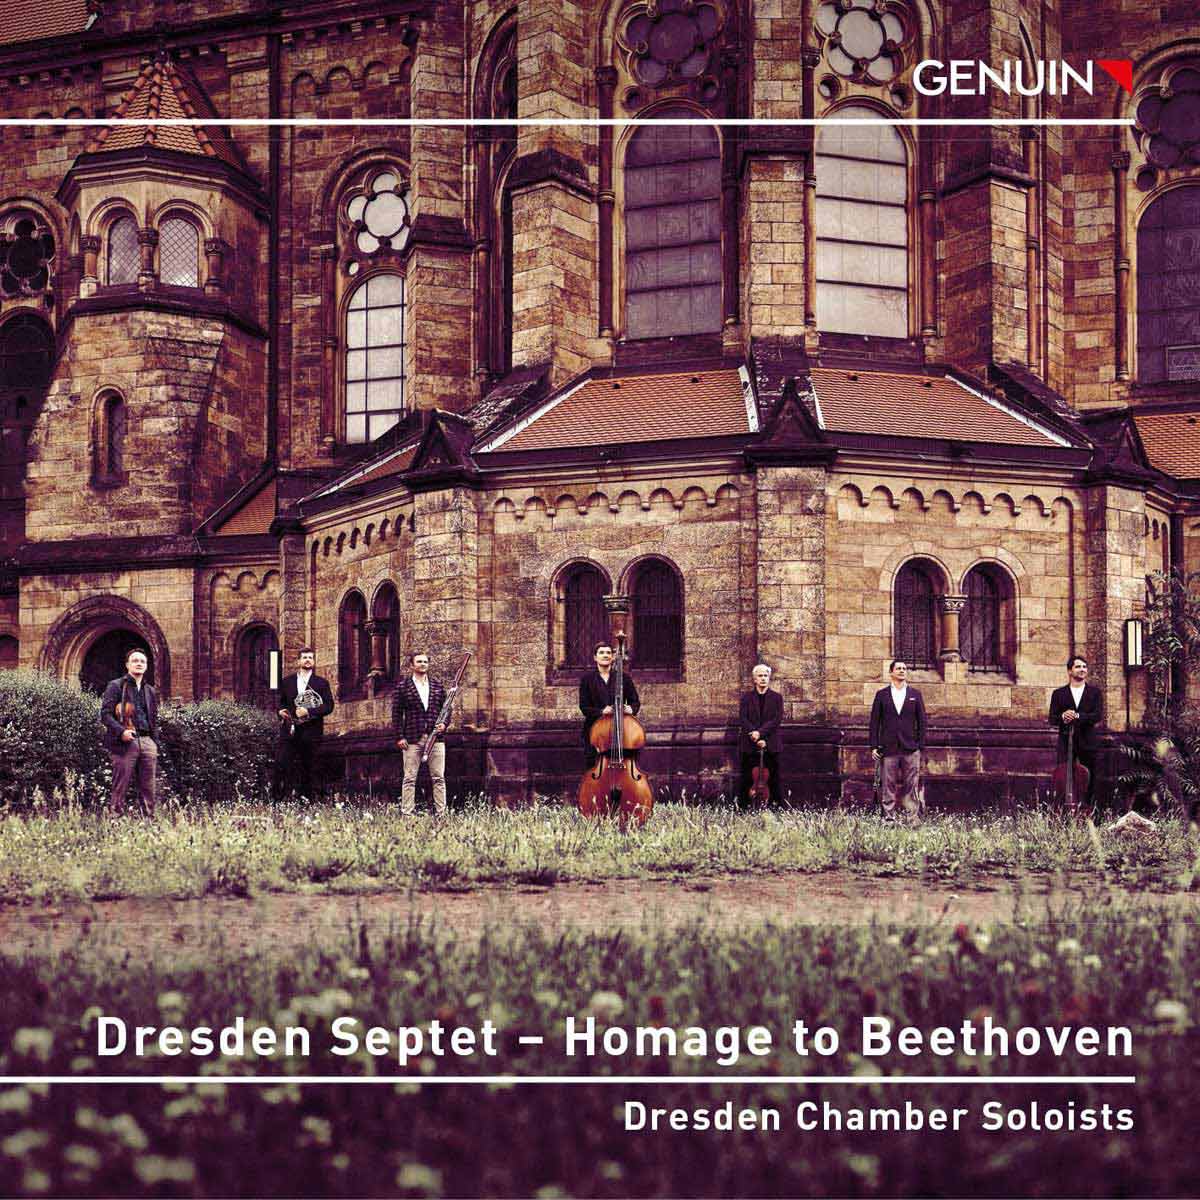 CD album cover 'Dresden Septet  Homage to Beethoven ' (GEN 23805) with Dresden Chamber Soloists